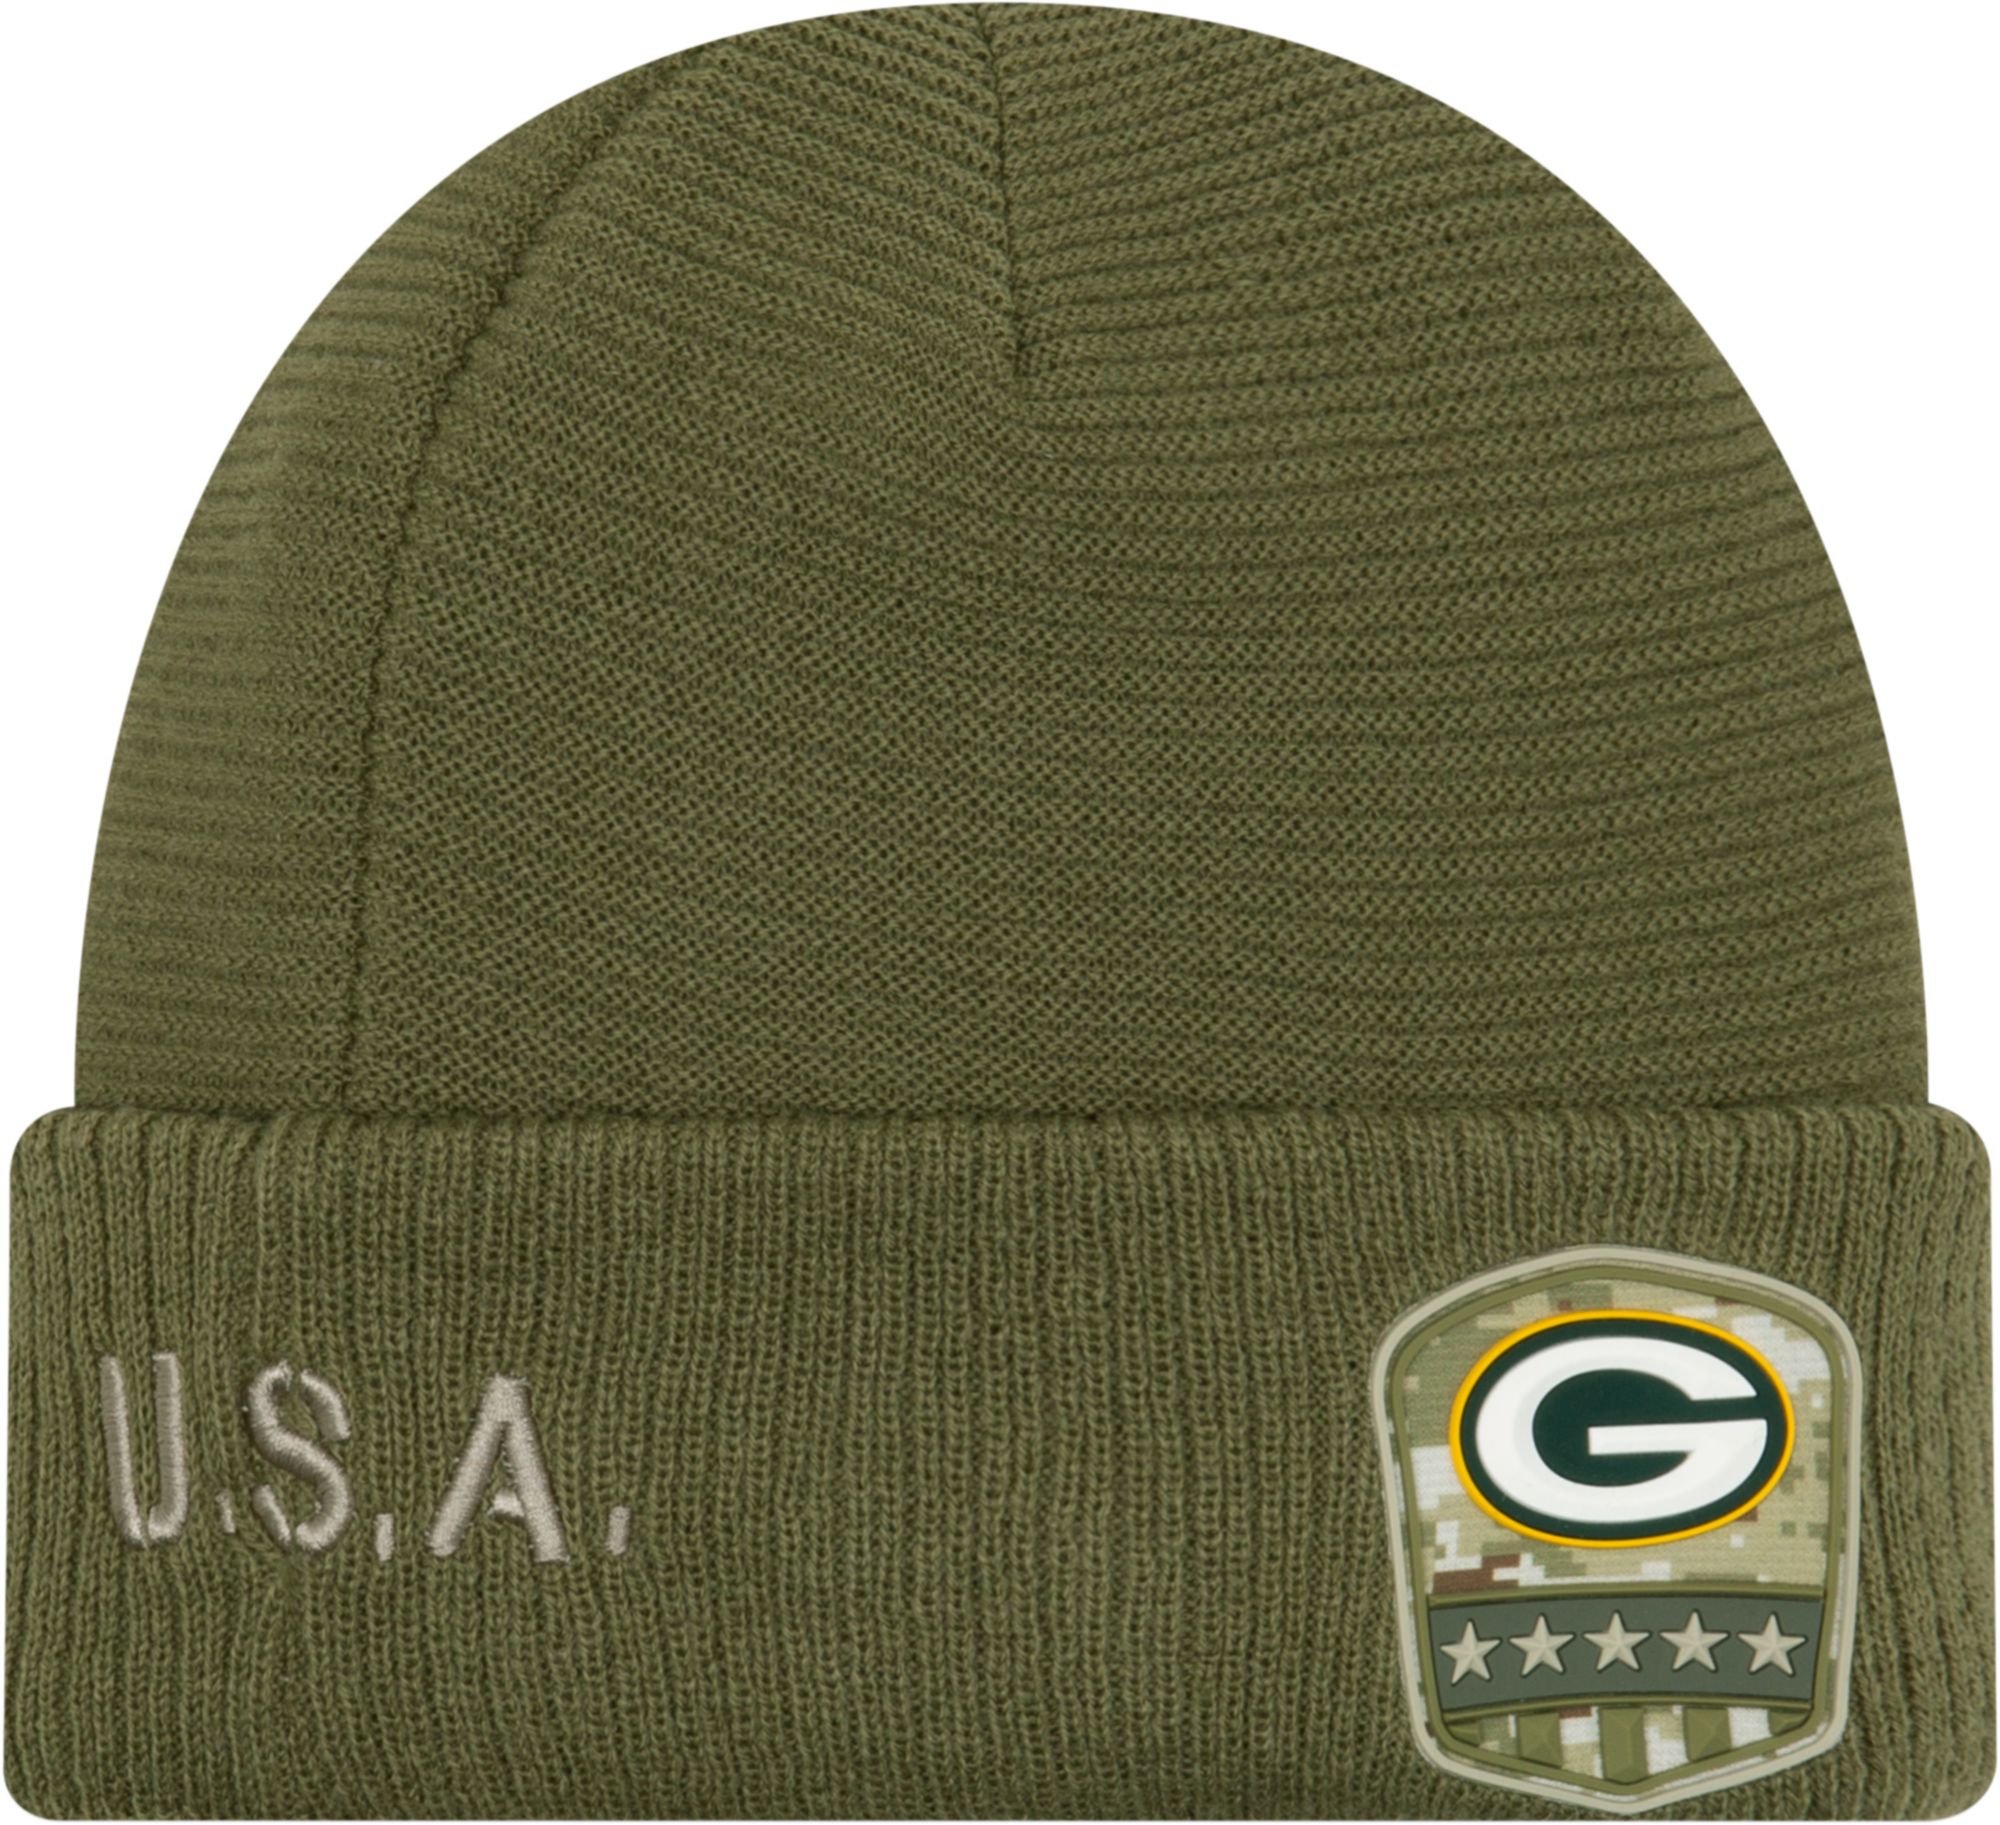 2019 Green Bay Packers Era Salute to Service Knit Hat Sideline Beanie Cap for sale online 